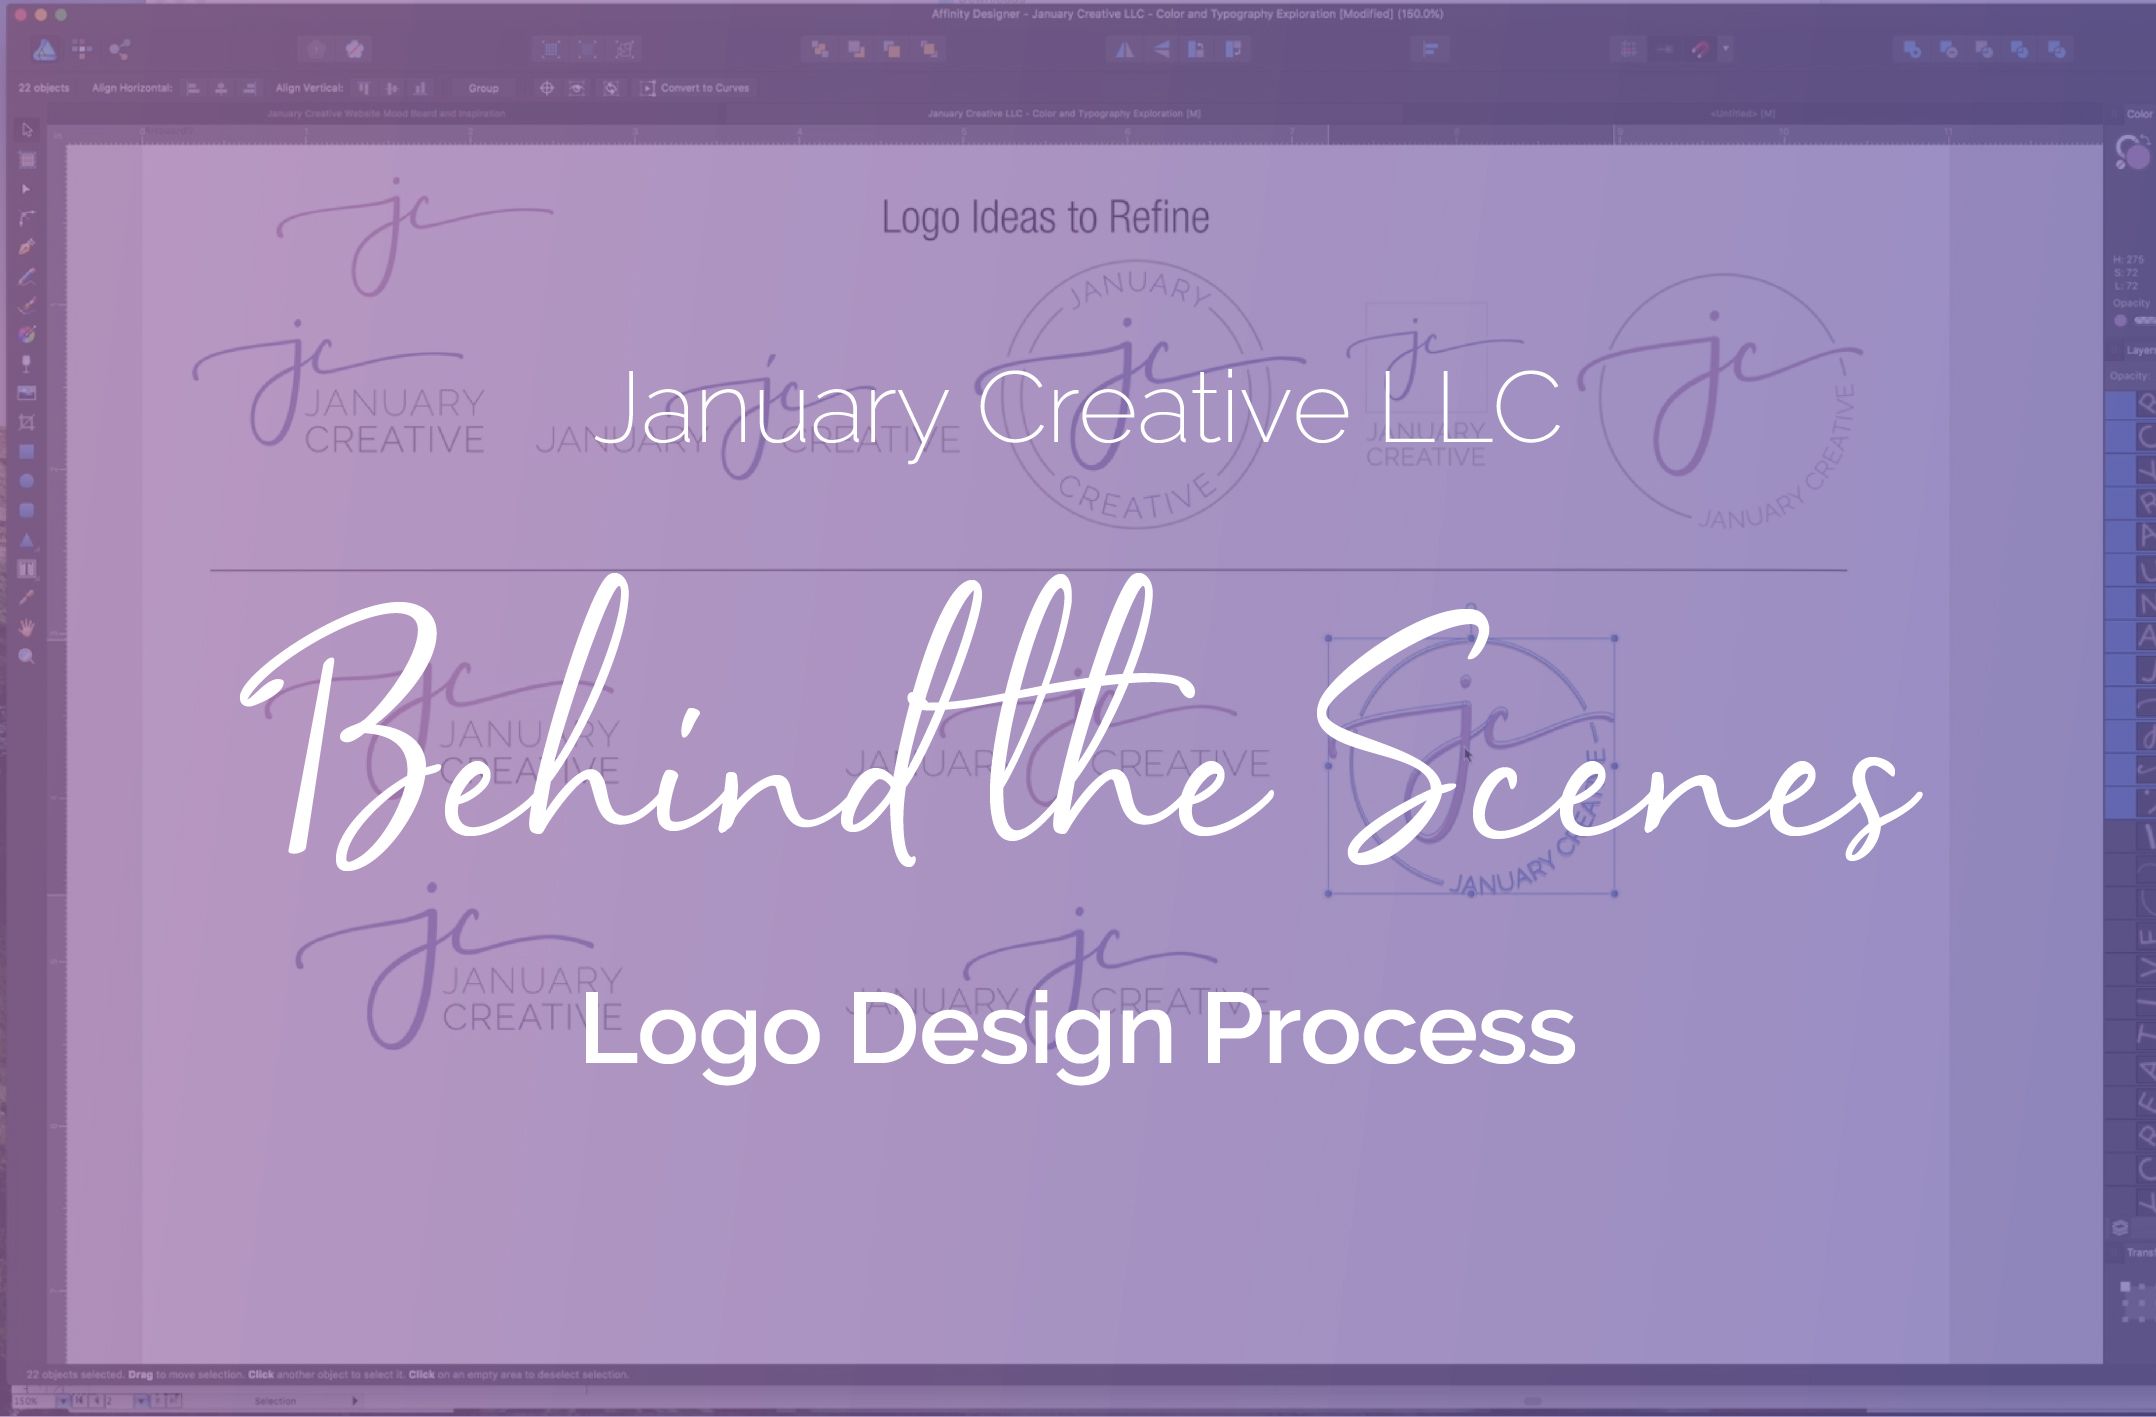 Branding and Design Process, Insights